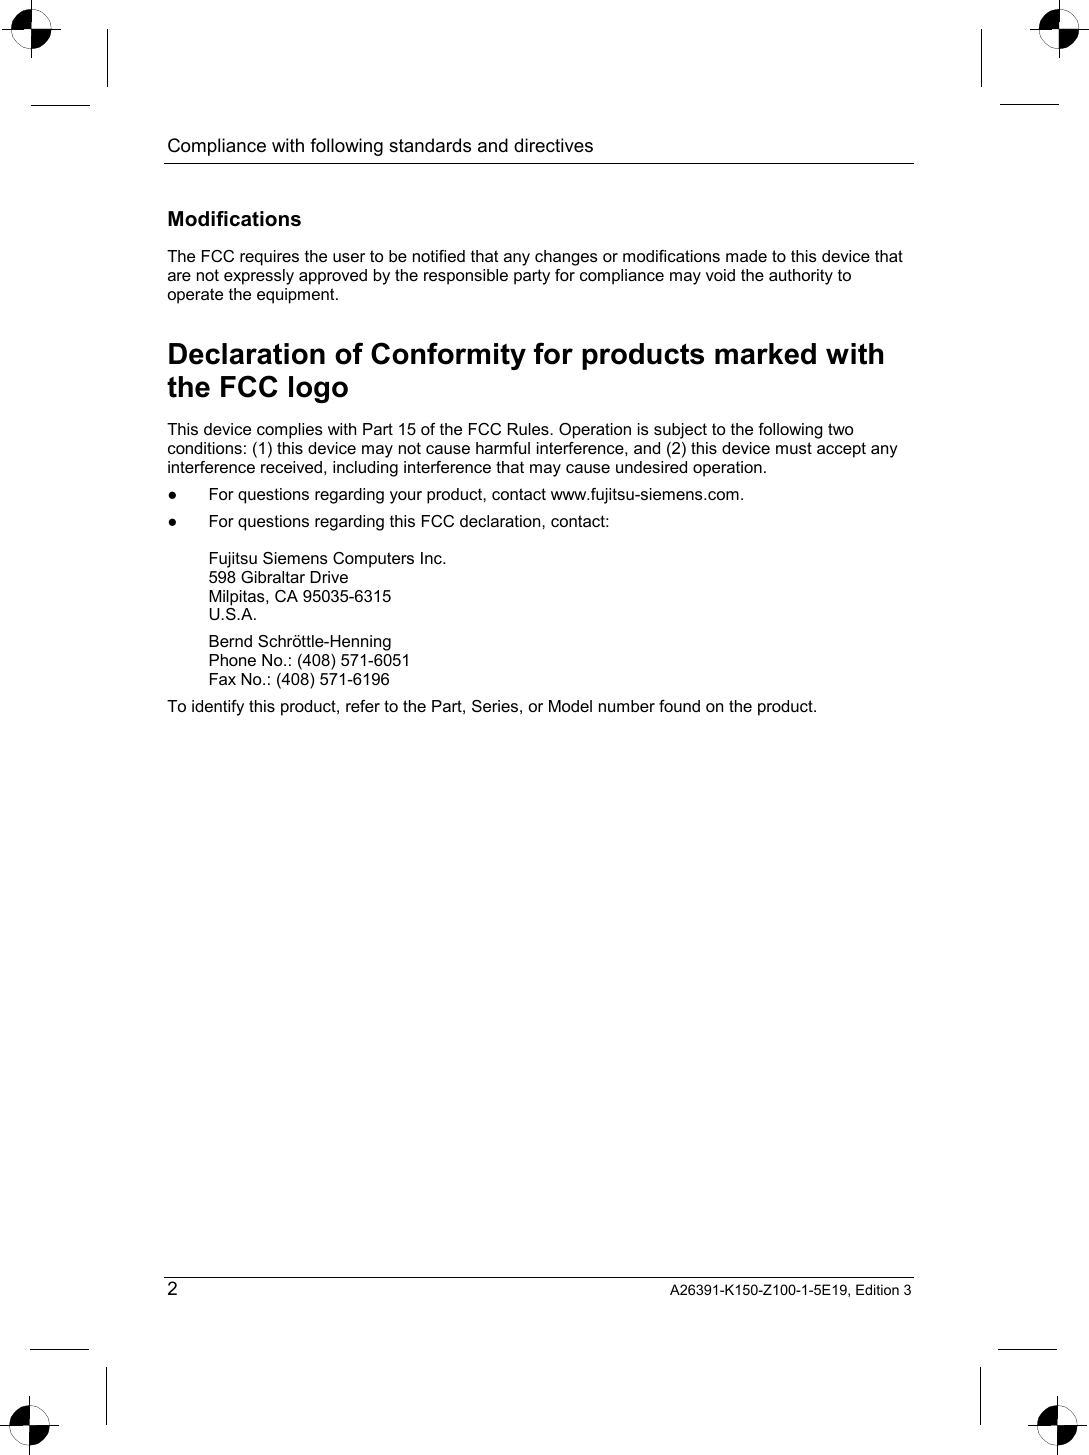 Compliance with following standards and directives   2 A26391-K150-Z100-1-5E19, Edition 3 Modifications The FCC requires the user to be notified that any changes or modifications made to this device that are not expressly approved by the responsible party for compliance may void the authority to operate the equipment. Declaration of Conformity for products marked with the FCC logo This device complies with Part 15 of the FCC Rules. Operation is subject to the following two conditions: (1) this device may not cause harmful interference, and (2) this device must accept any interference received, including interference that may cause undesired operation. ●  For questions regarding your product, contact www.fujitsu-siemens.com. ●  For questions regarding this FCC declaration, contact:  Fujitsu Siemens Computers Inc. 598 Gibraltar Drive Milpitas, CA 95035-6315 U.S.A. Bernd Schröttle-Henning Phone No.: (408) 571-6051 Fax No.: (408) 571-6196 To identify this product, refer to the Part, Series, or Model number found on the product. 